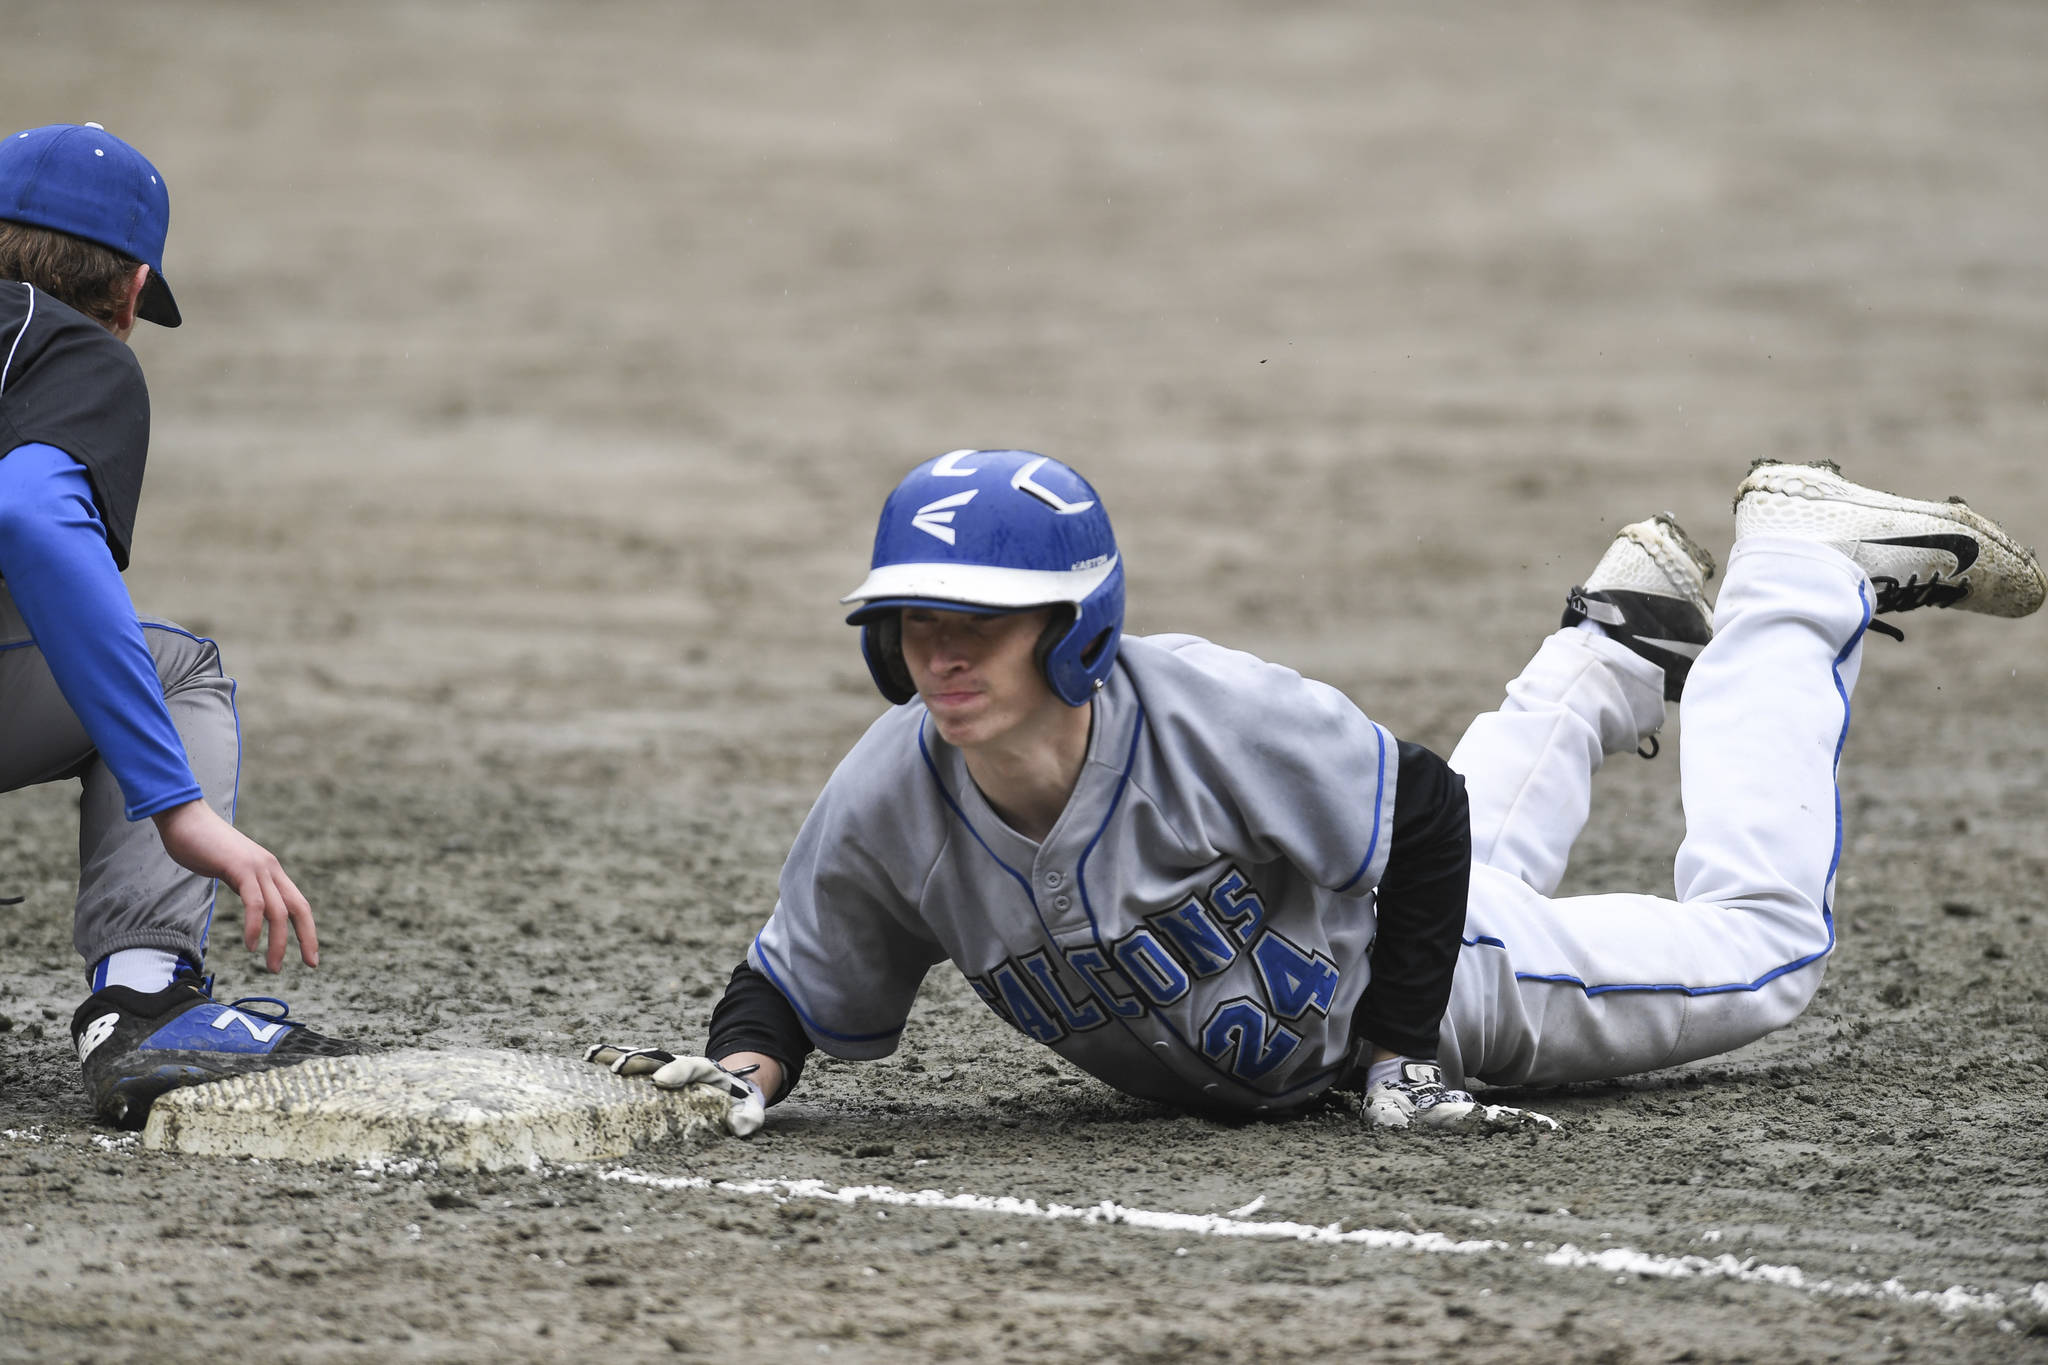 Thunder Mountain’s Josh Carte to forced to dive back to first base against Petersburg during the Region V Baseball Championship at Adair-Kennedy Memorial Park on Thursday, May 23, 2019. Petersburg won 4-1. (Michael Penn | Juneau Empire)